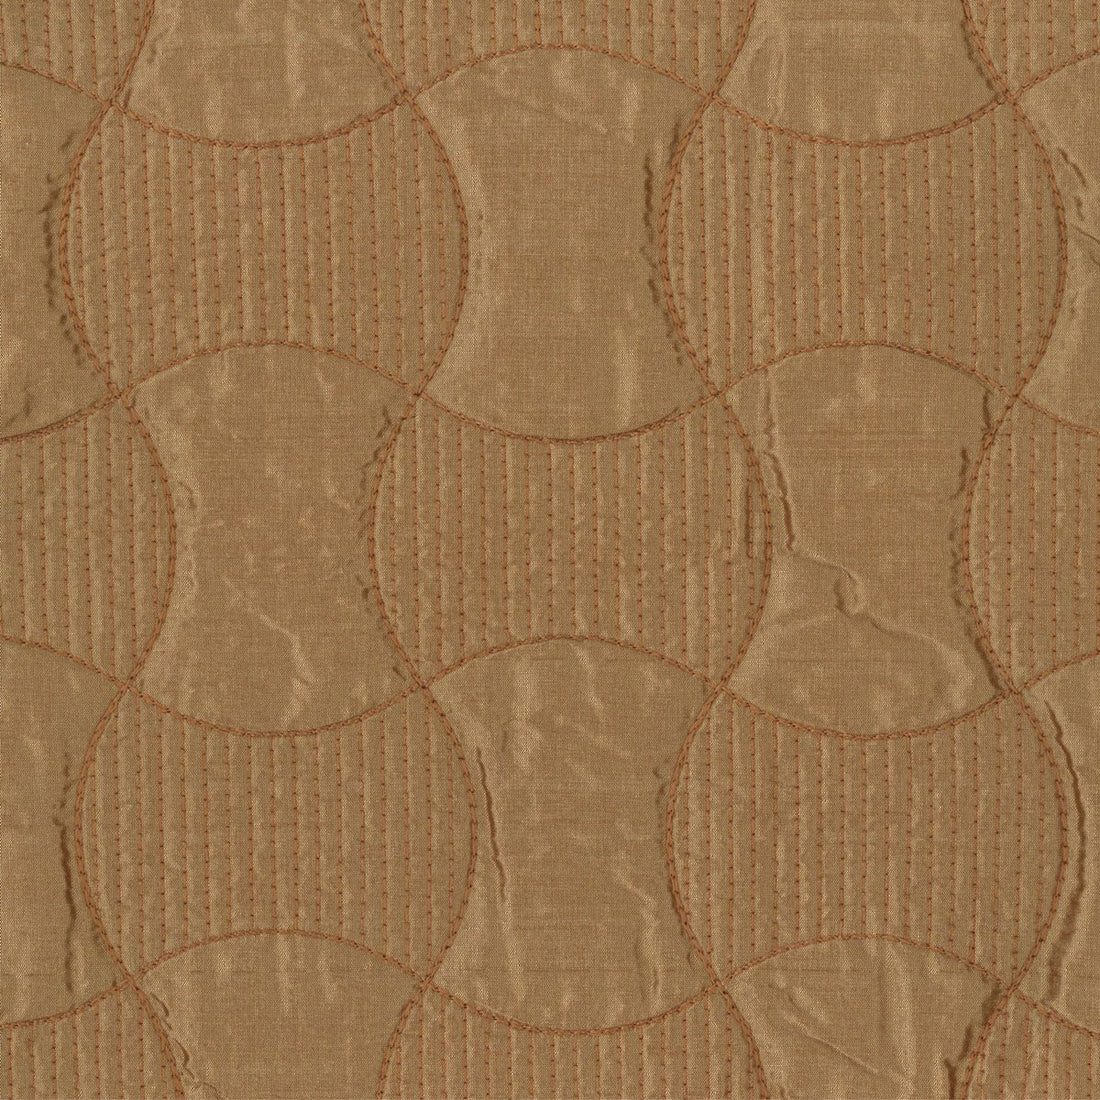 Carrollton fabric in bronze color - pattern number ZS 00035540 - by Scalamandre in the Old World Weavers collection